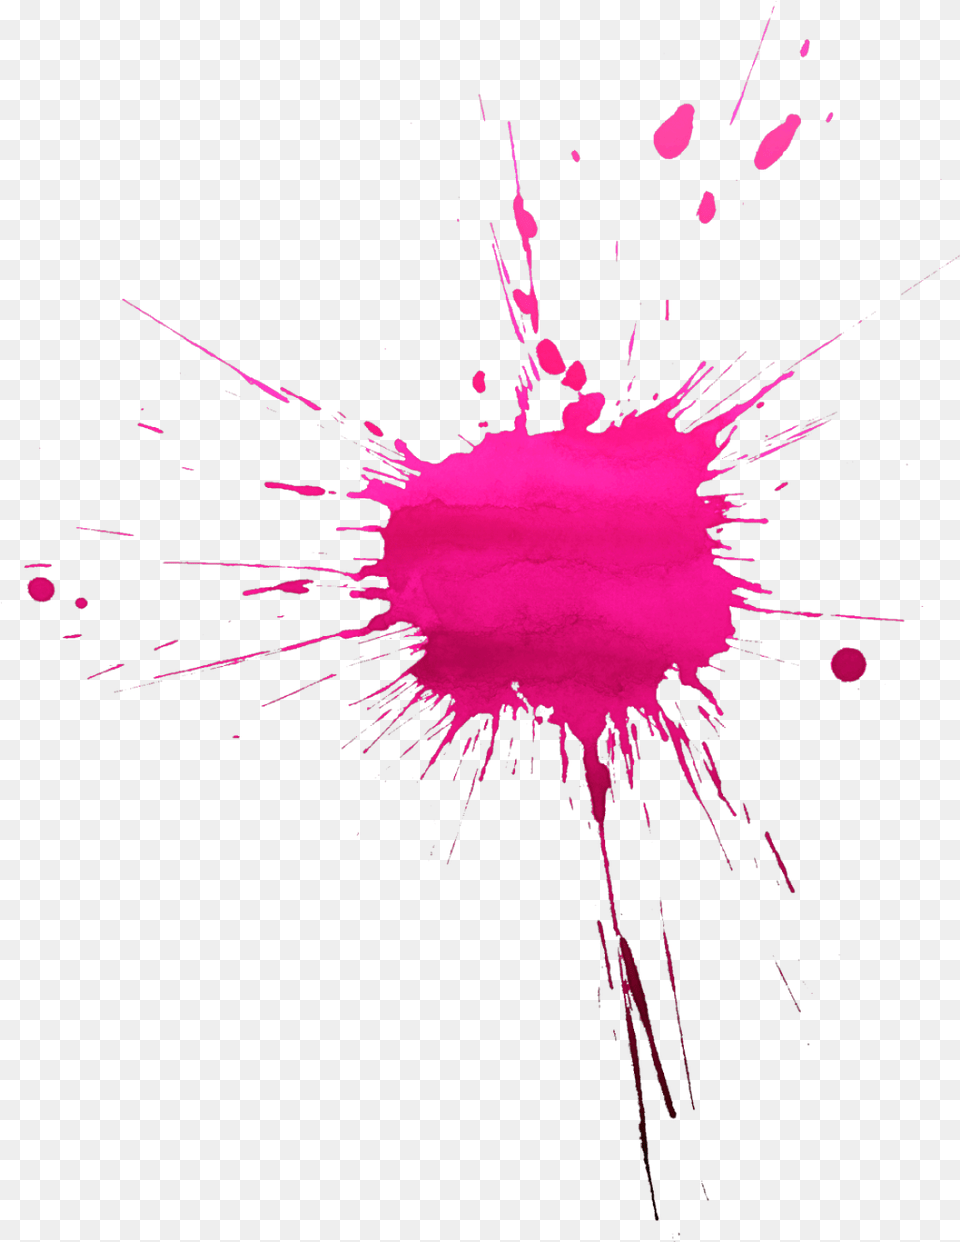 Spray Paint Line Watercolor Painting Hd Black Watercolor Drop, Purple, Stain, Fireworks, Light Free Png Download